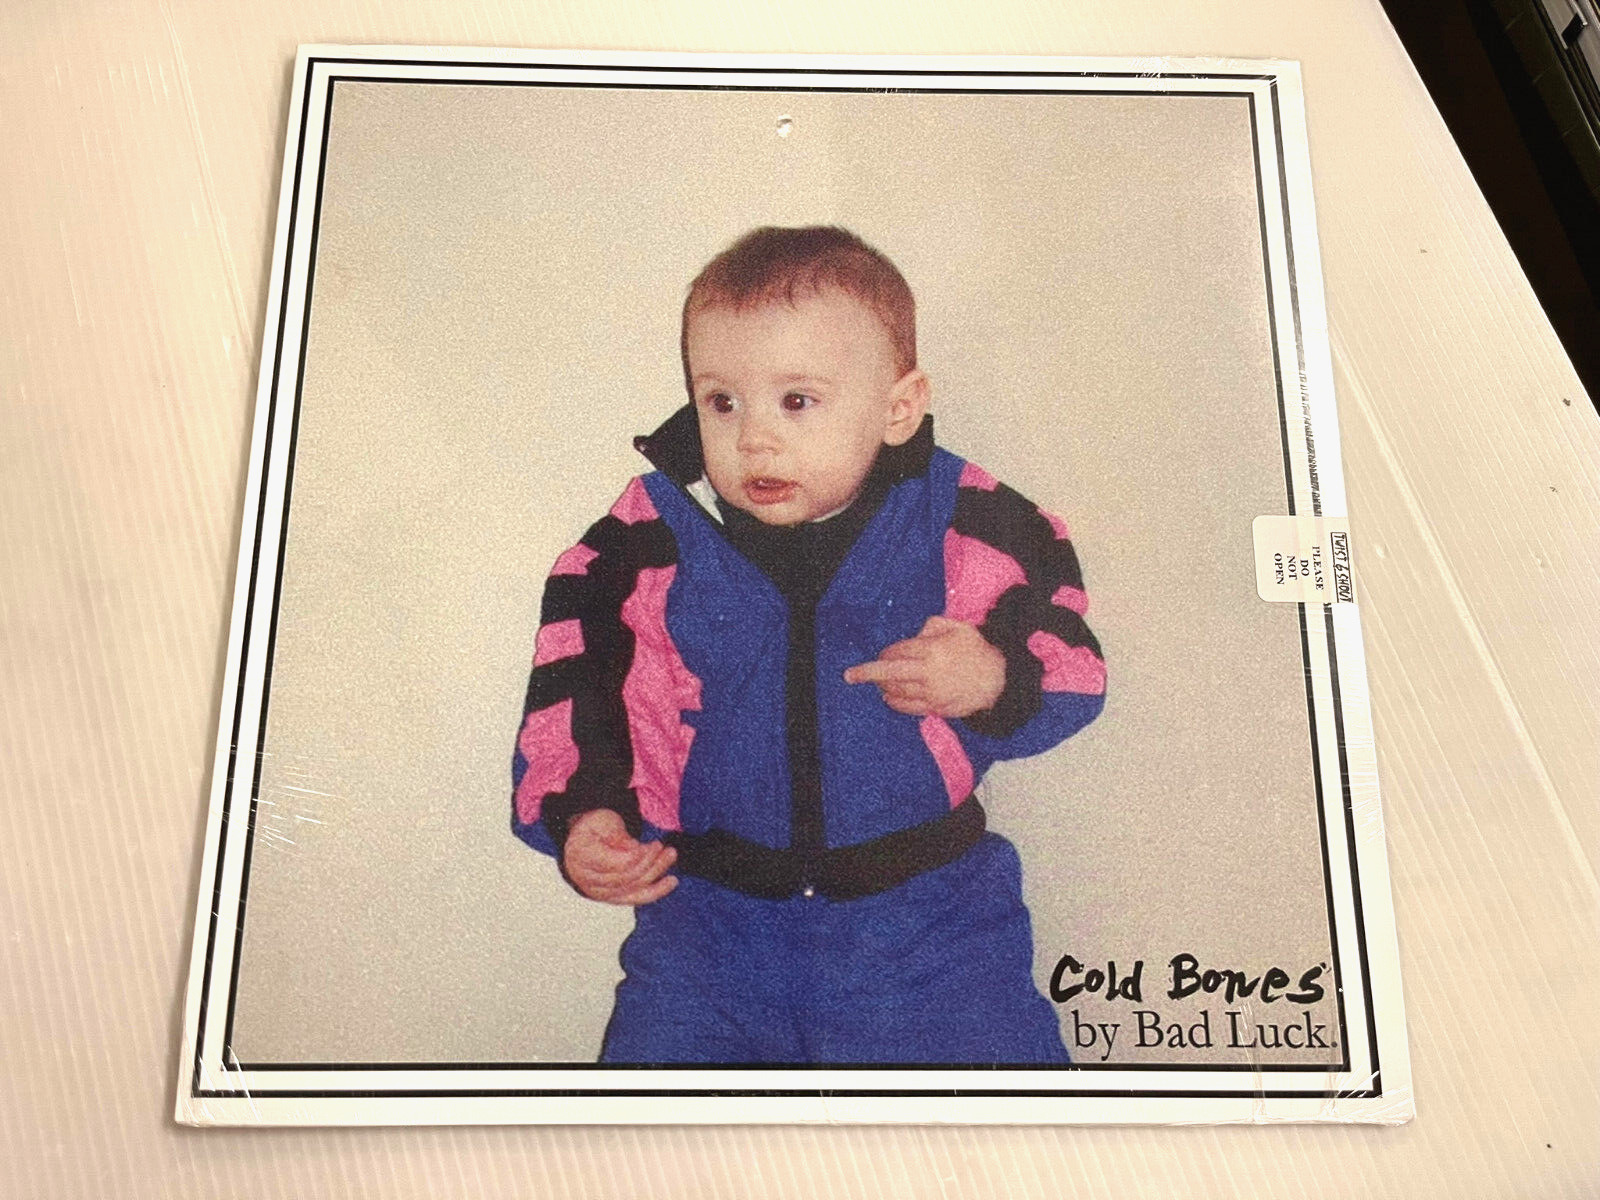 BAD LUCK Cold Bones LP New! Sealed! 2020 Tragic Hero Take This To Heart COLORED